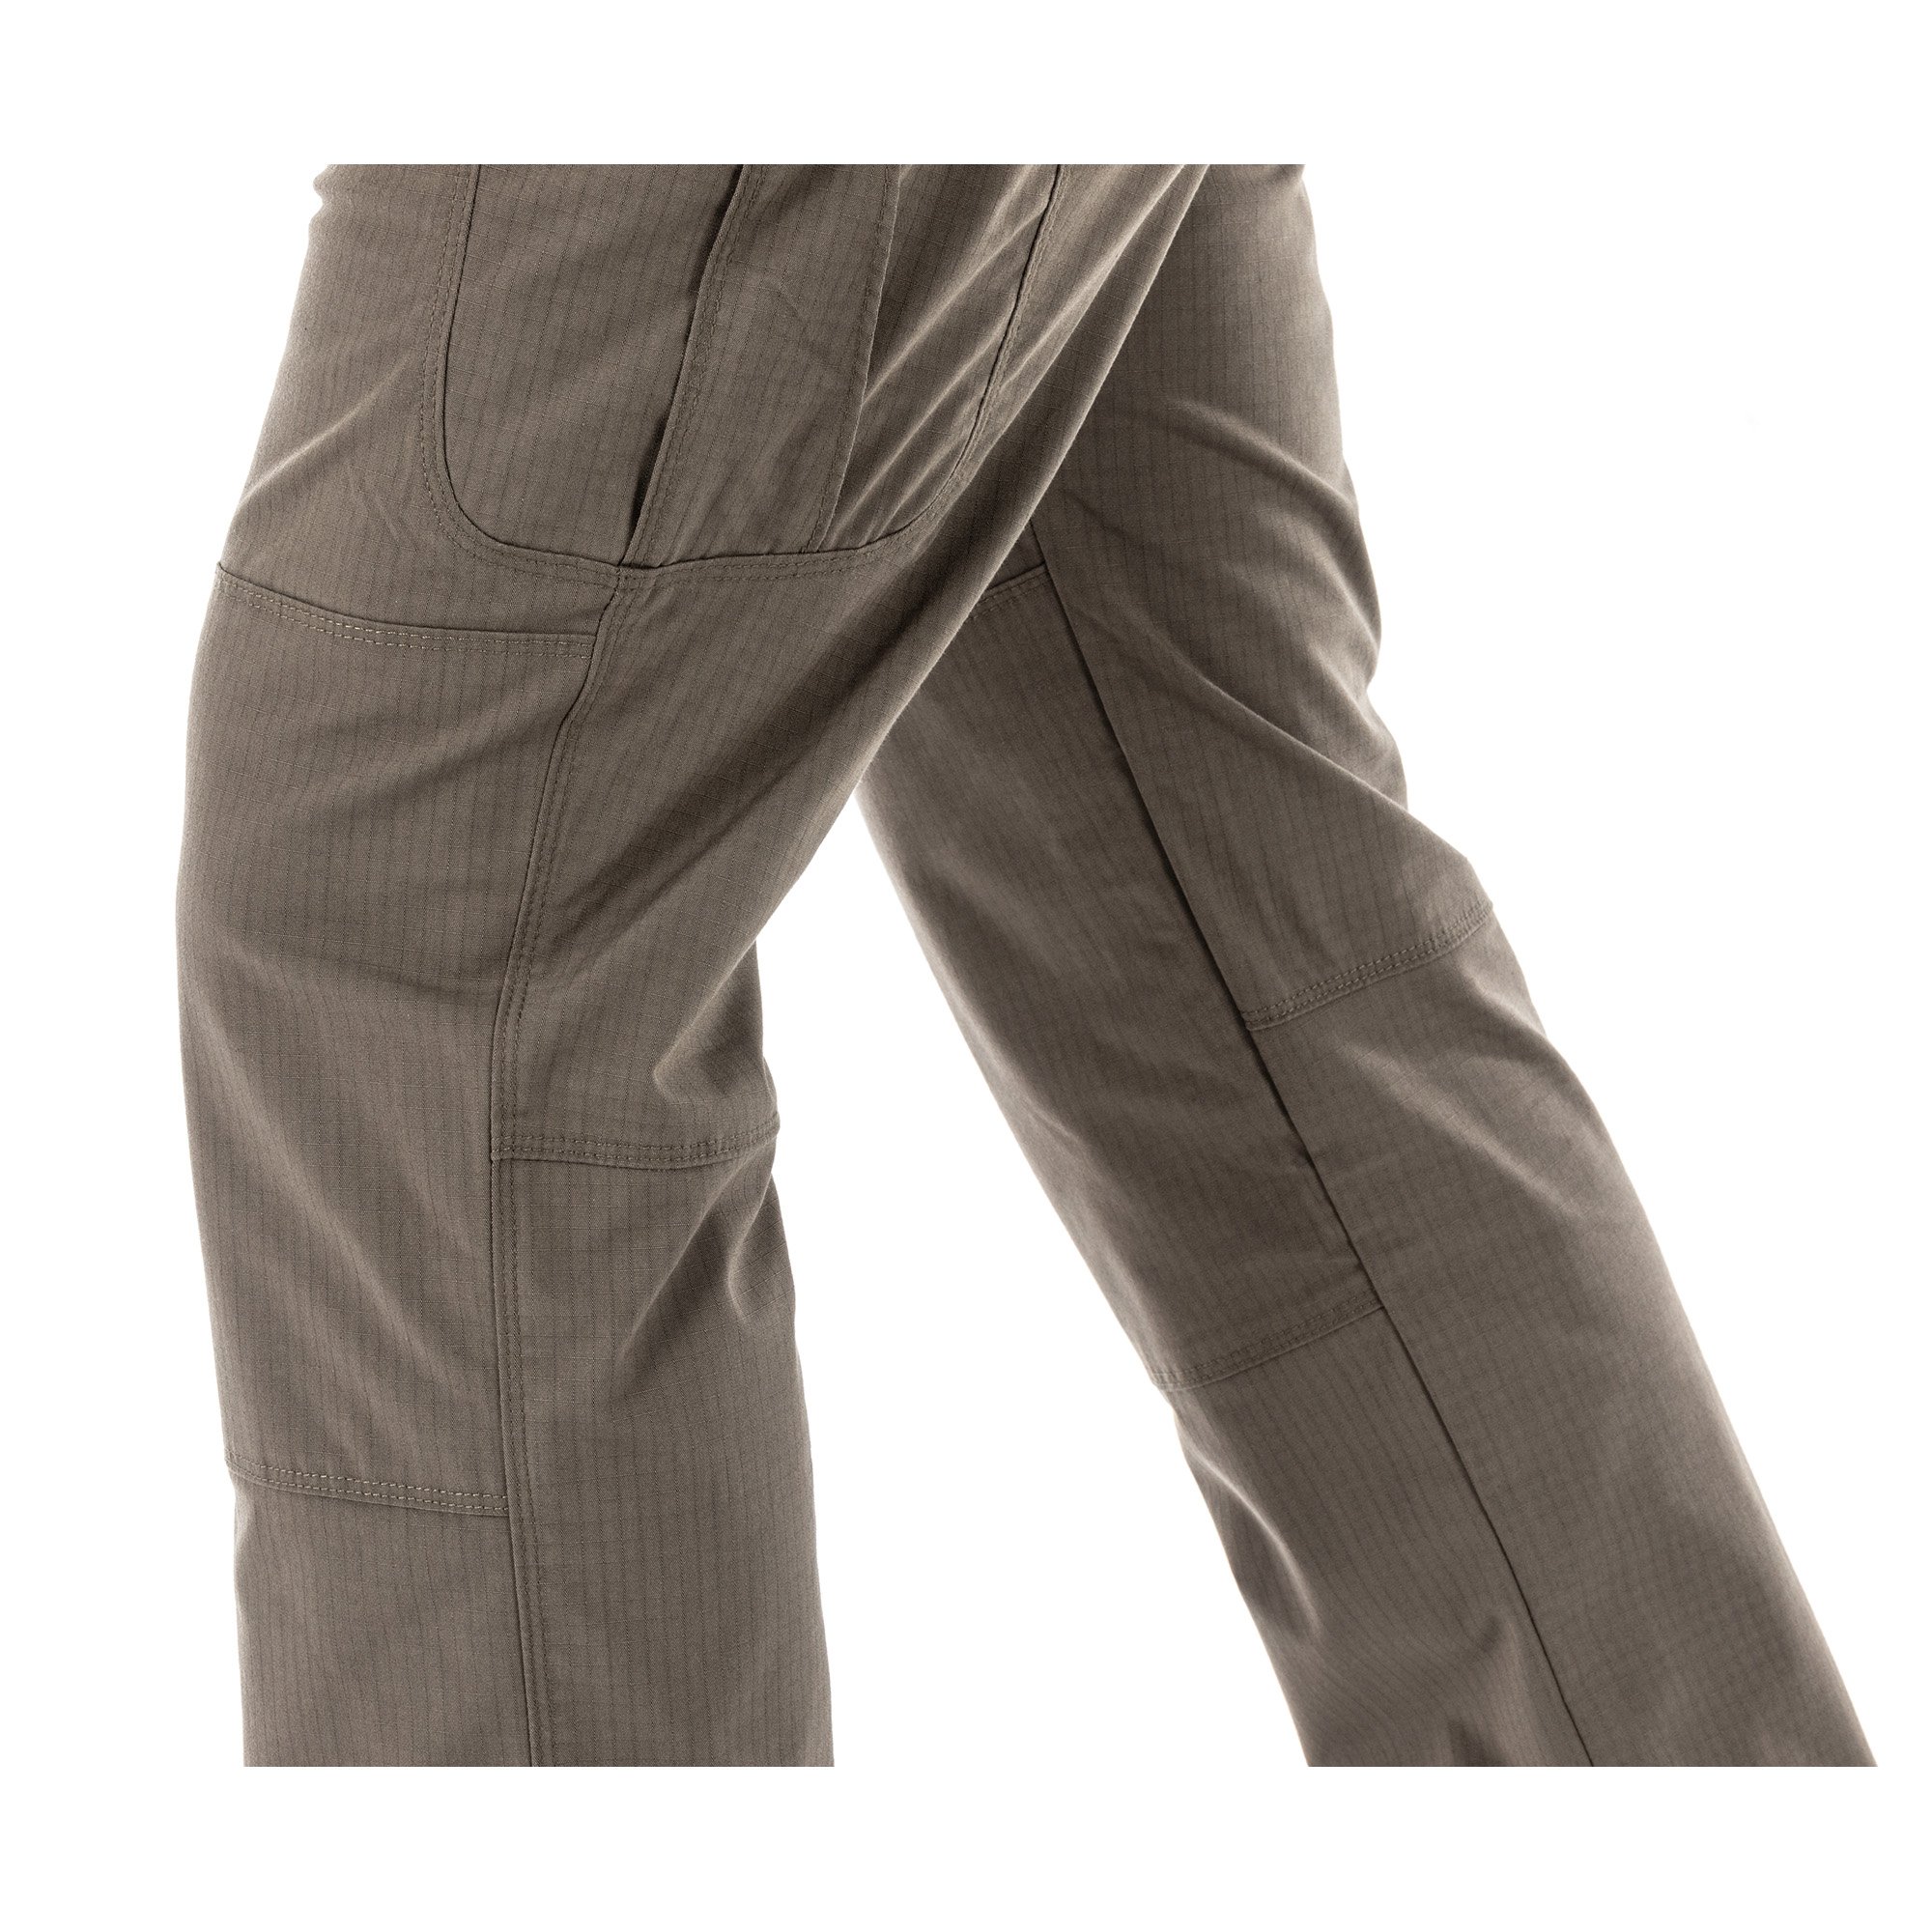 5.11 Work Gear Men's Stryke Pants, Adjustable Waistband, Stretchable Flex-Tac Fabric, Storm, 40W x 32L, Style 74369 - image 5 of 7